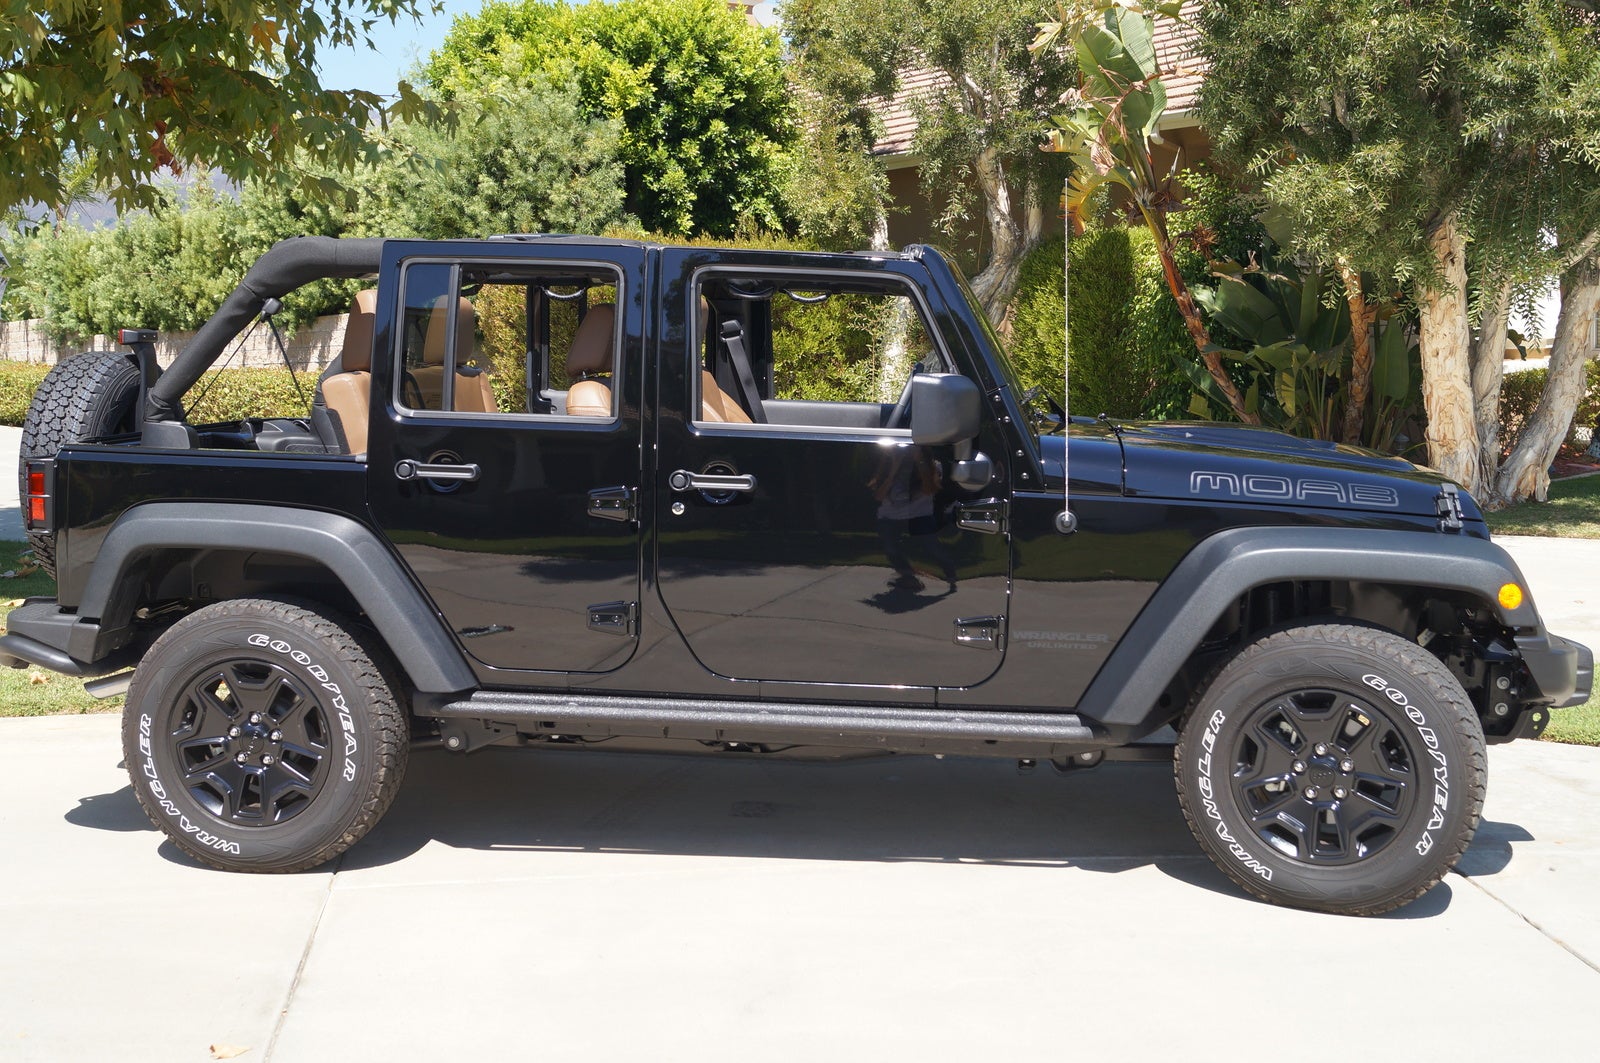 2013 Jeep wrangler unlimited freedom edition reviews #5